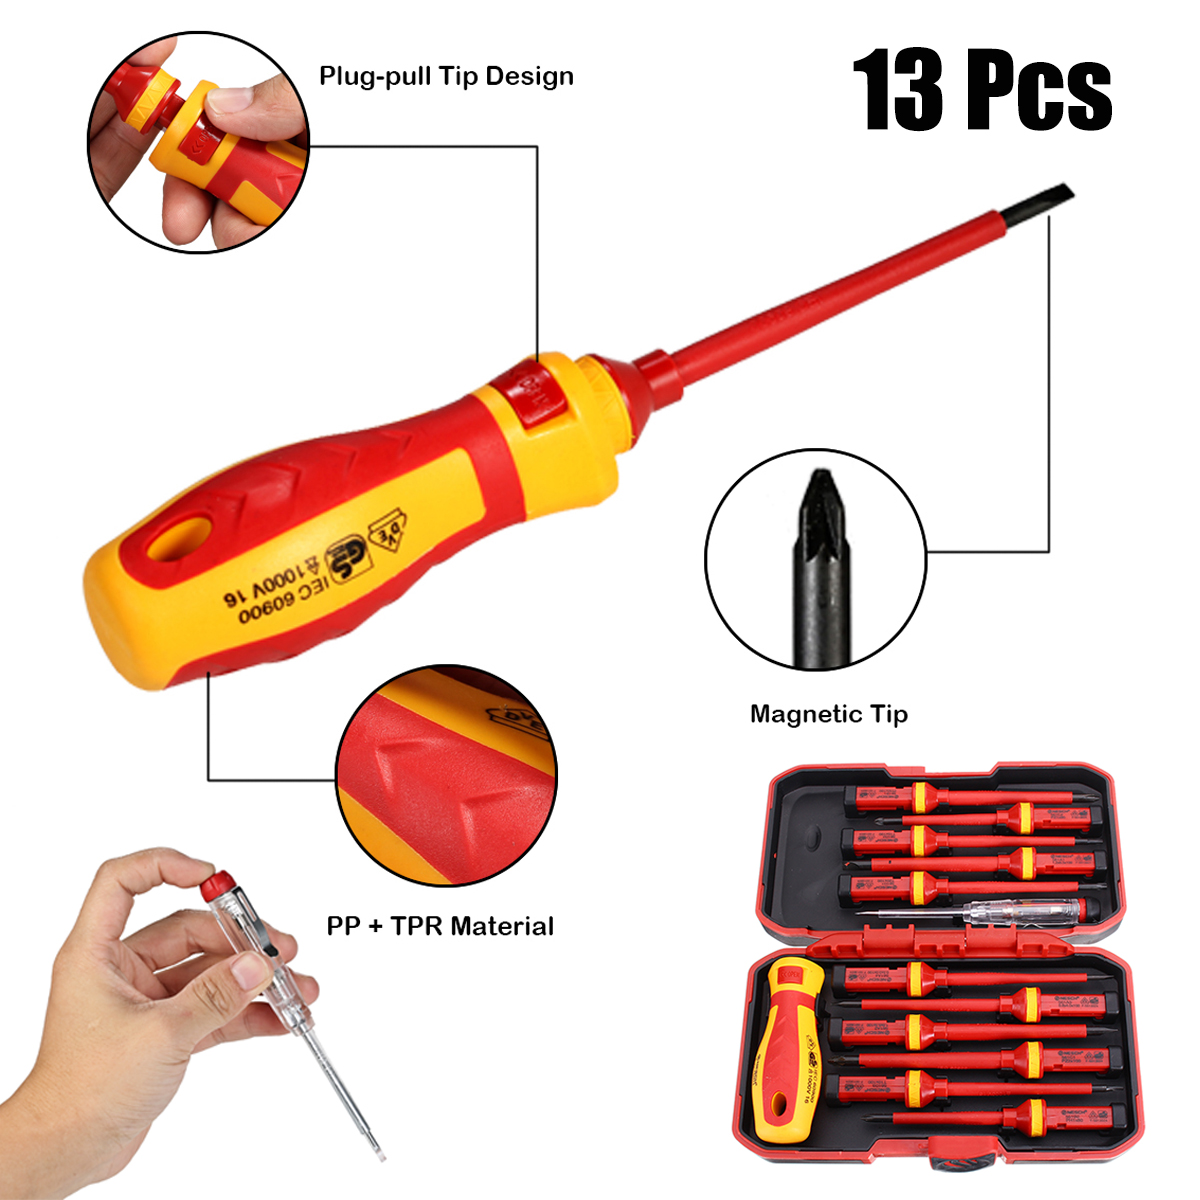 13Pcs-1000V-Electronic-Insulated-Screwdriver-Set-Phillips-Slotted-Torx-CR-V-Screwdriver-Hand-Tools-1224521-3